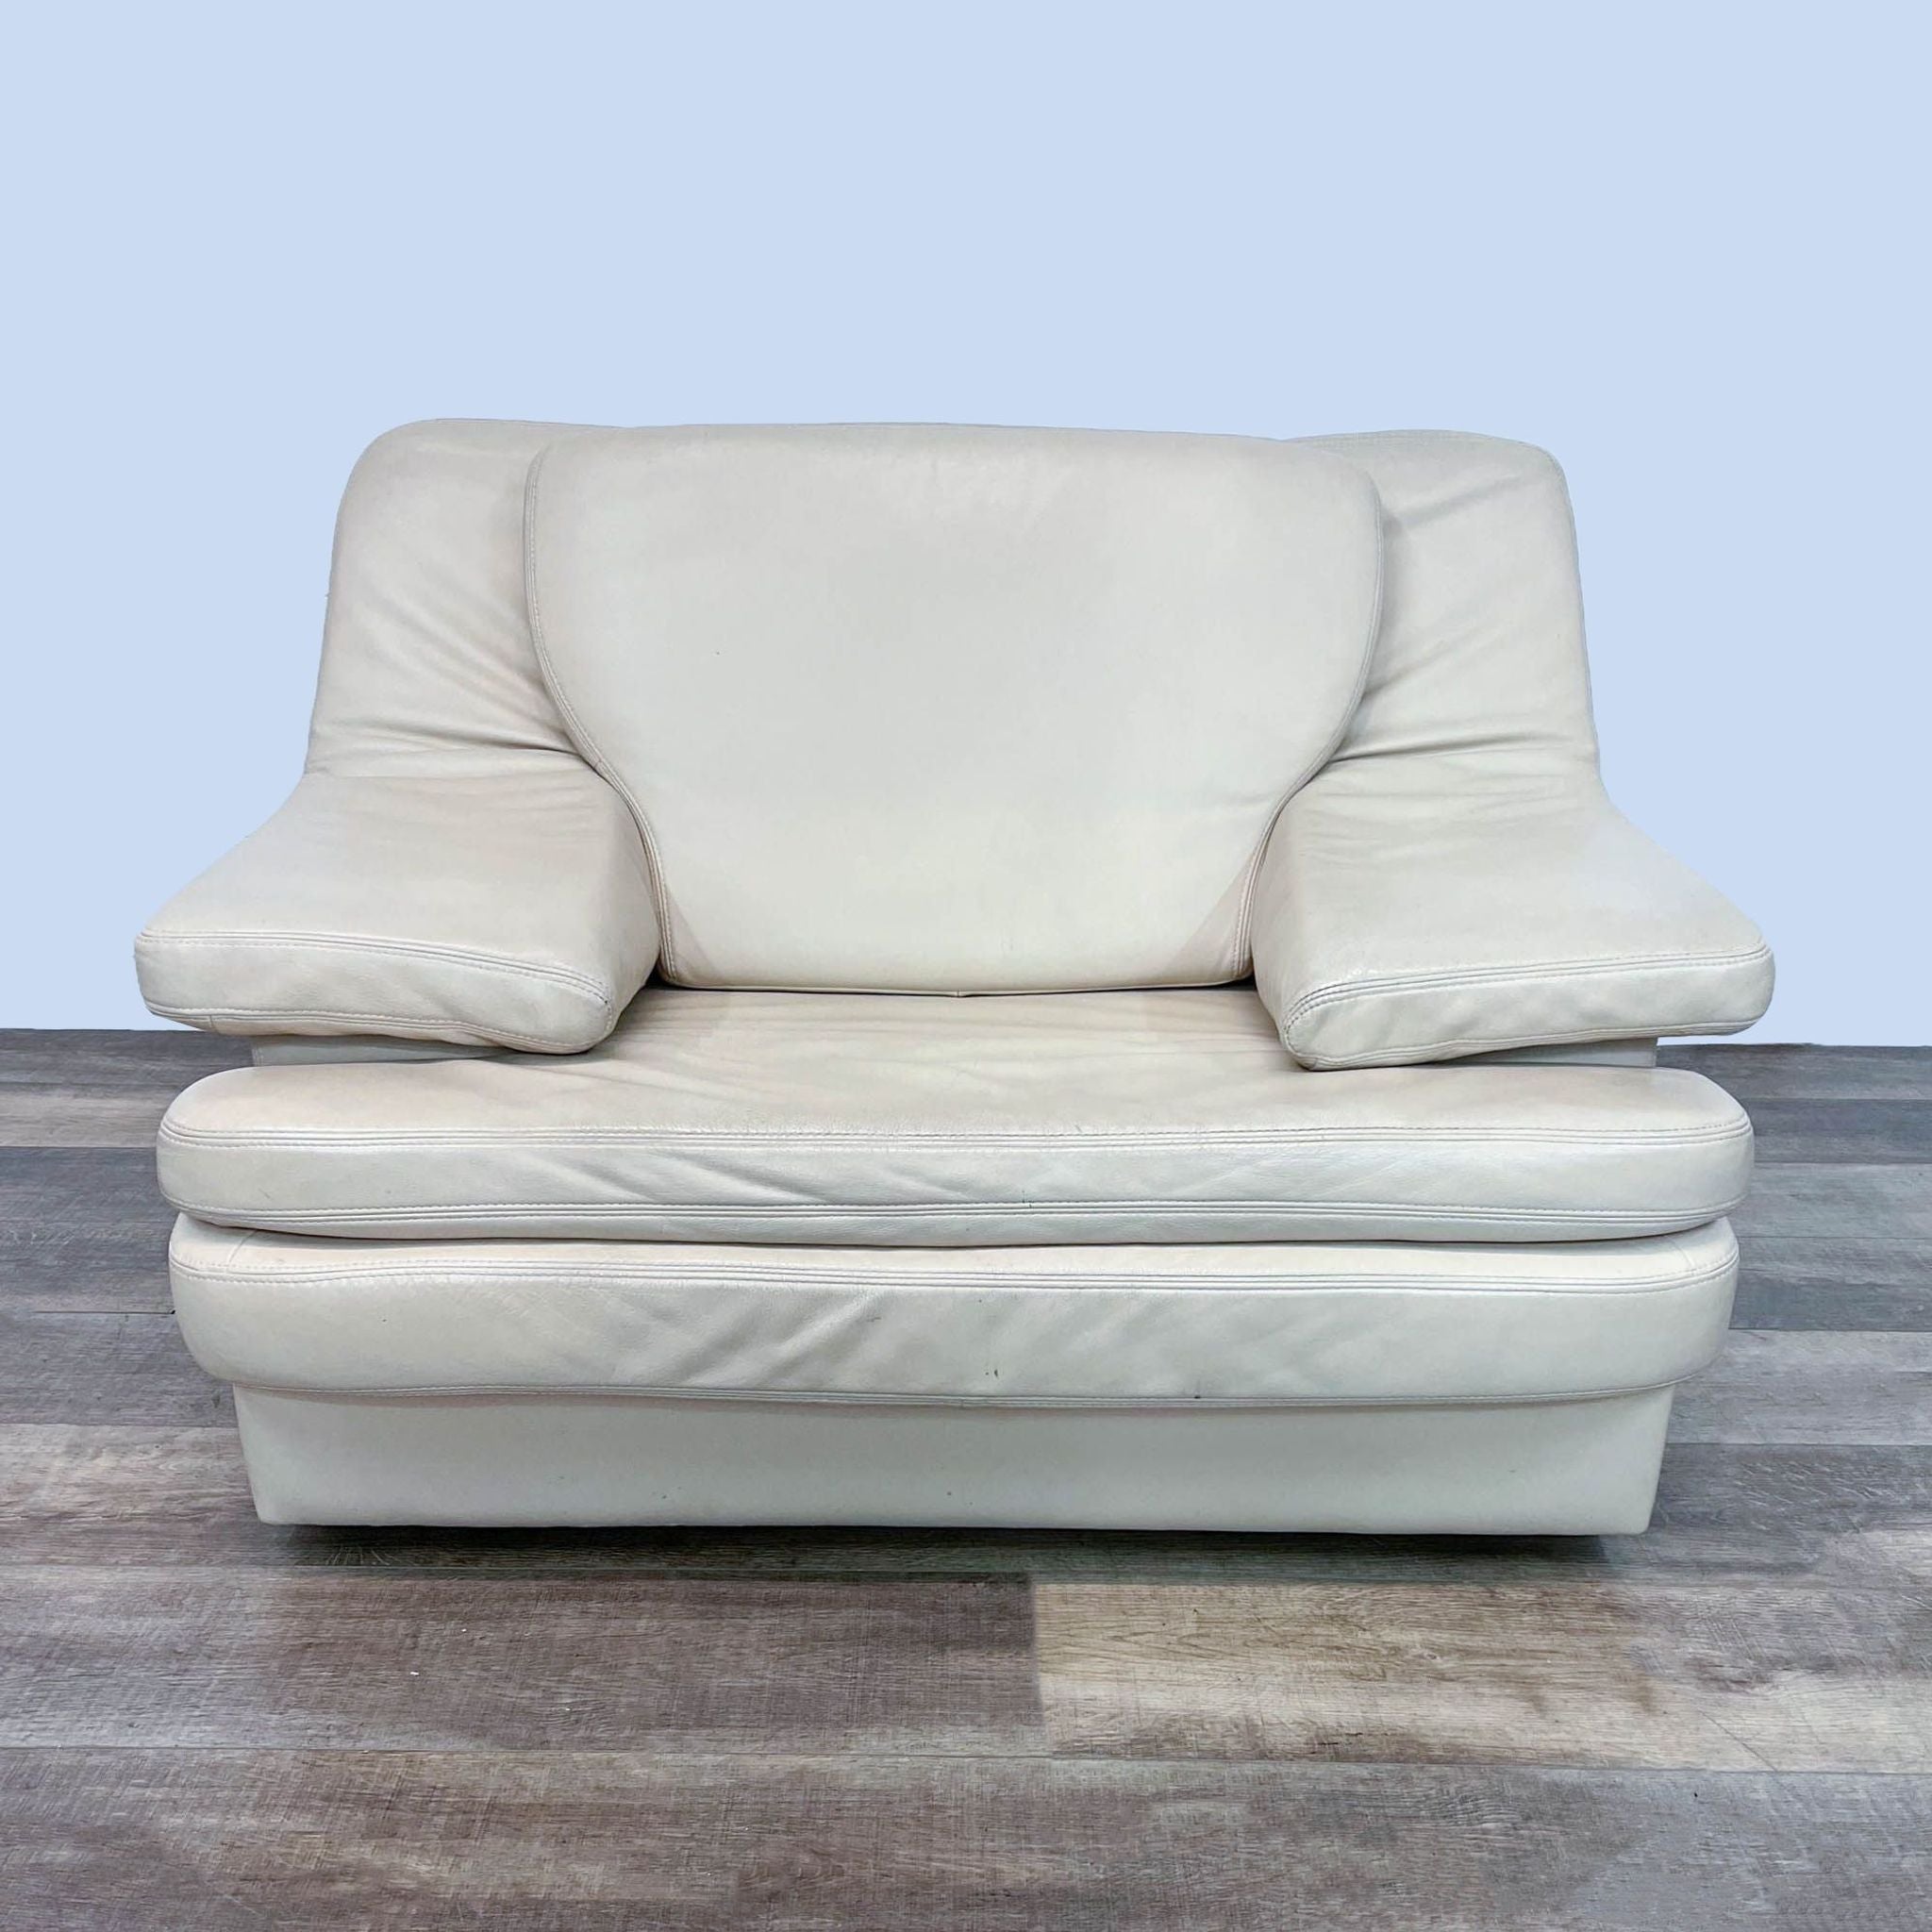 Reperch brand contemporary cream leather lounge chair with cushioning and wide armrests, set on wooden feet. Front view.